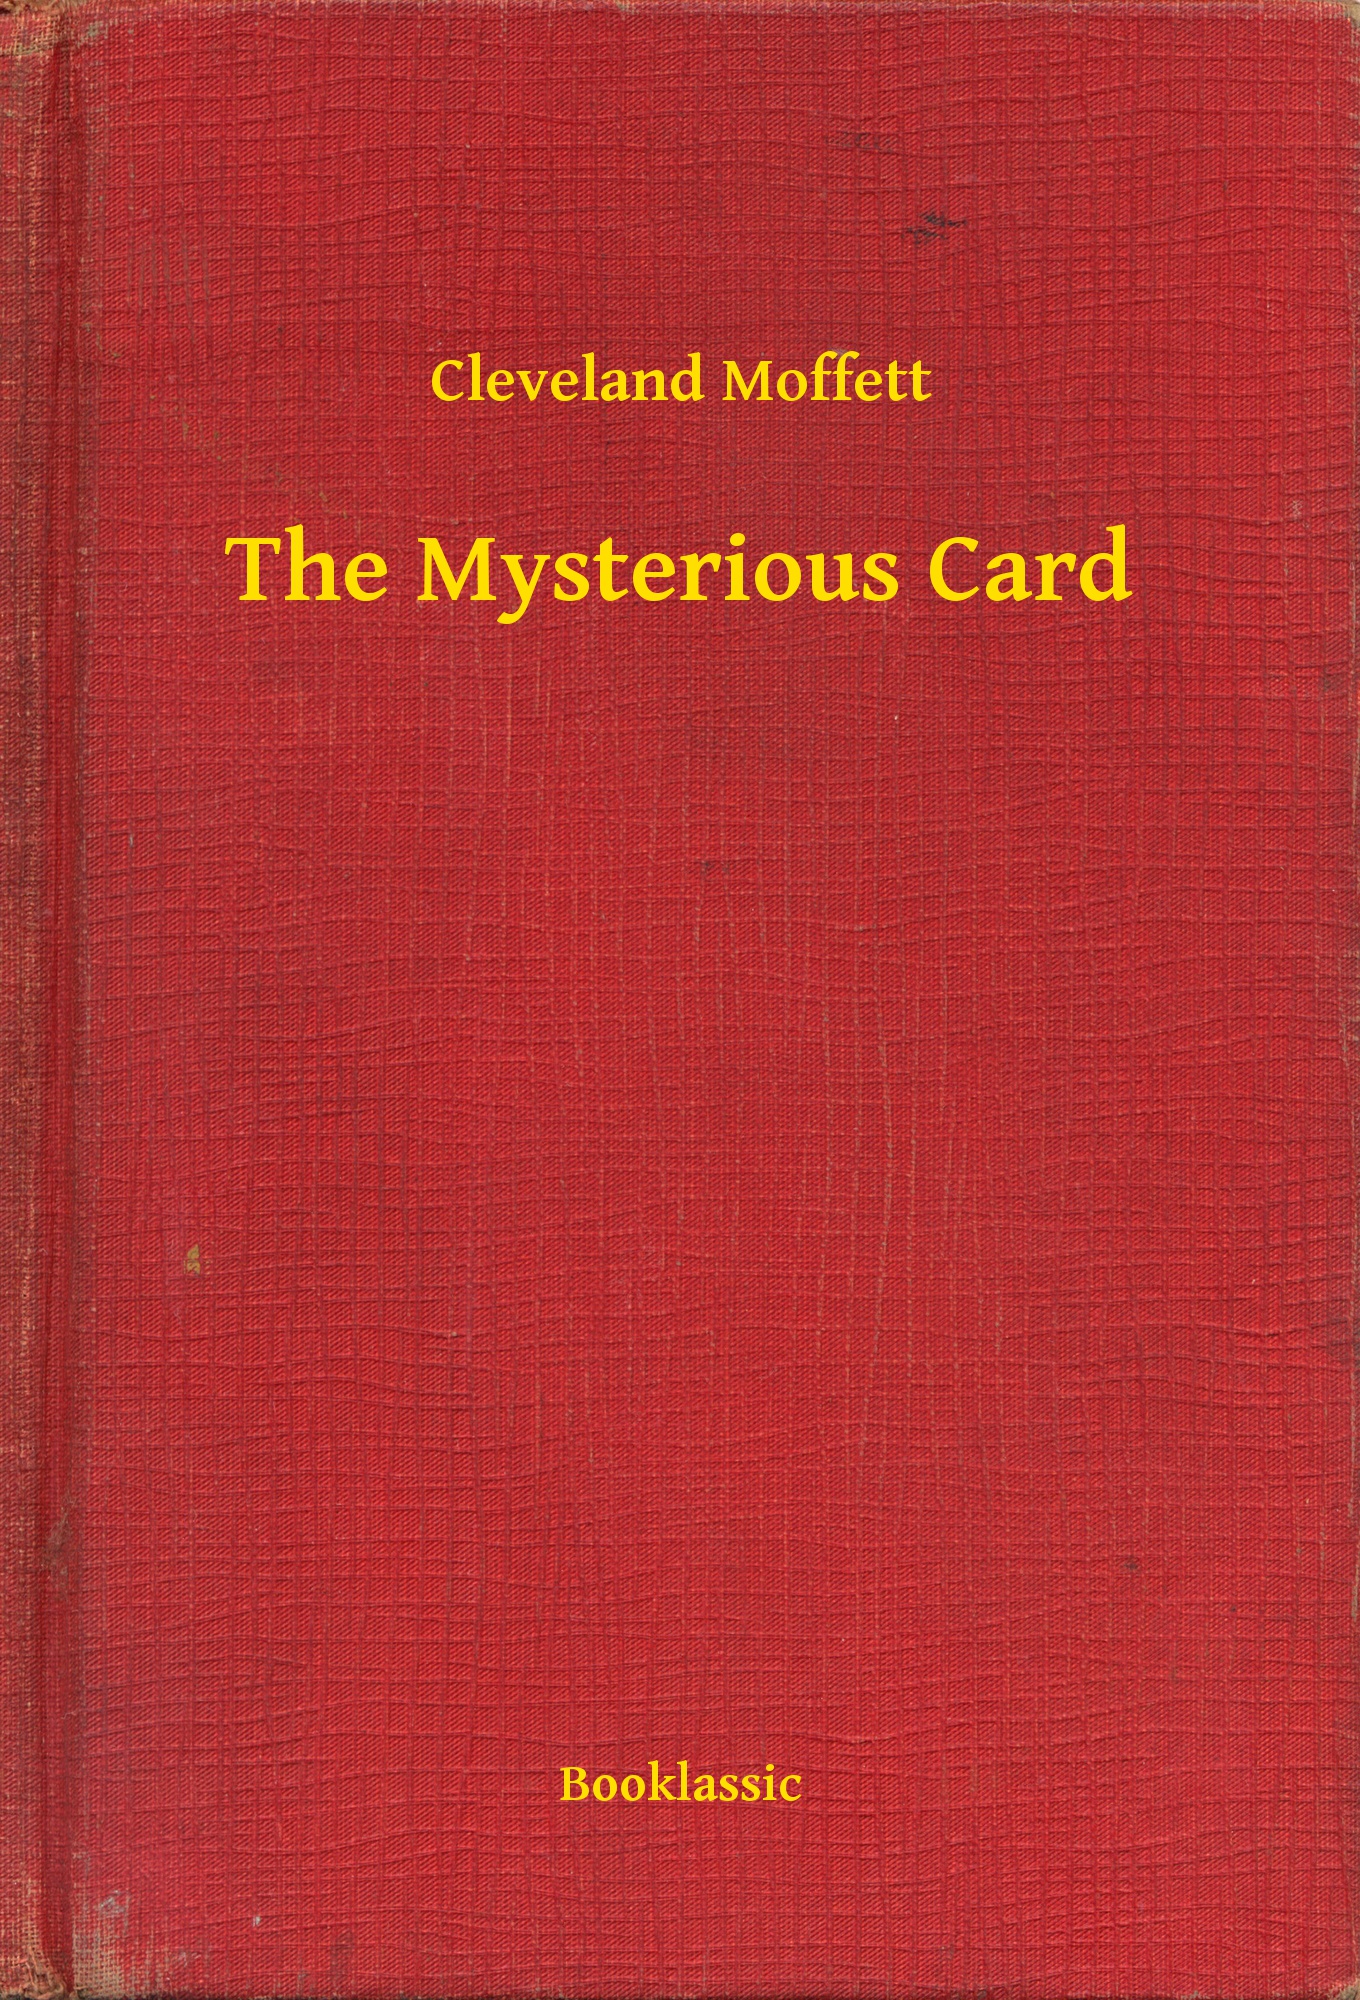 The Mysterious Card